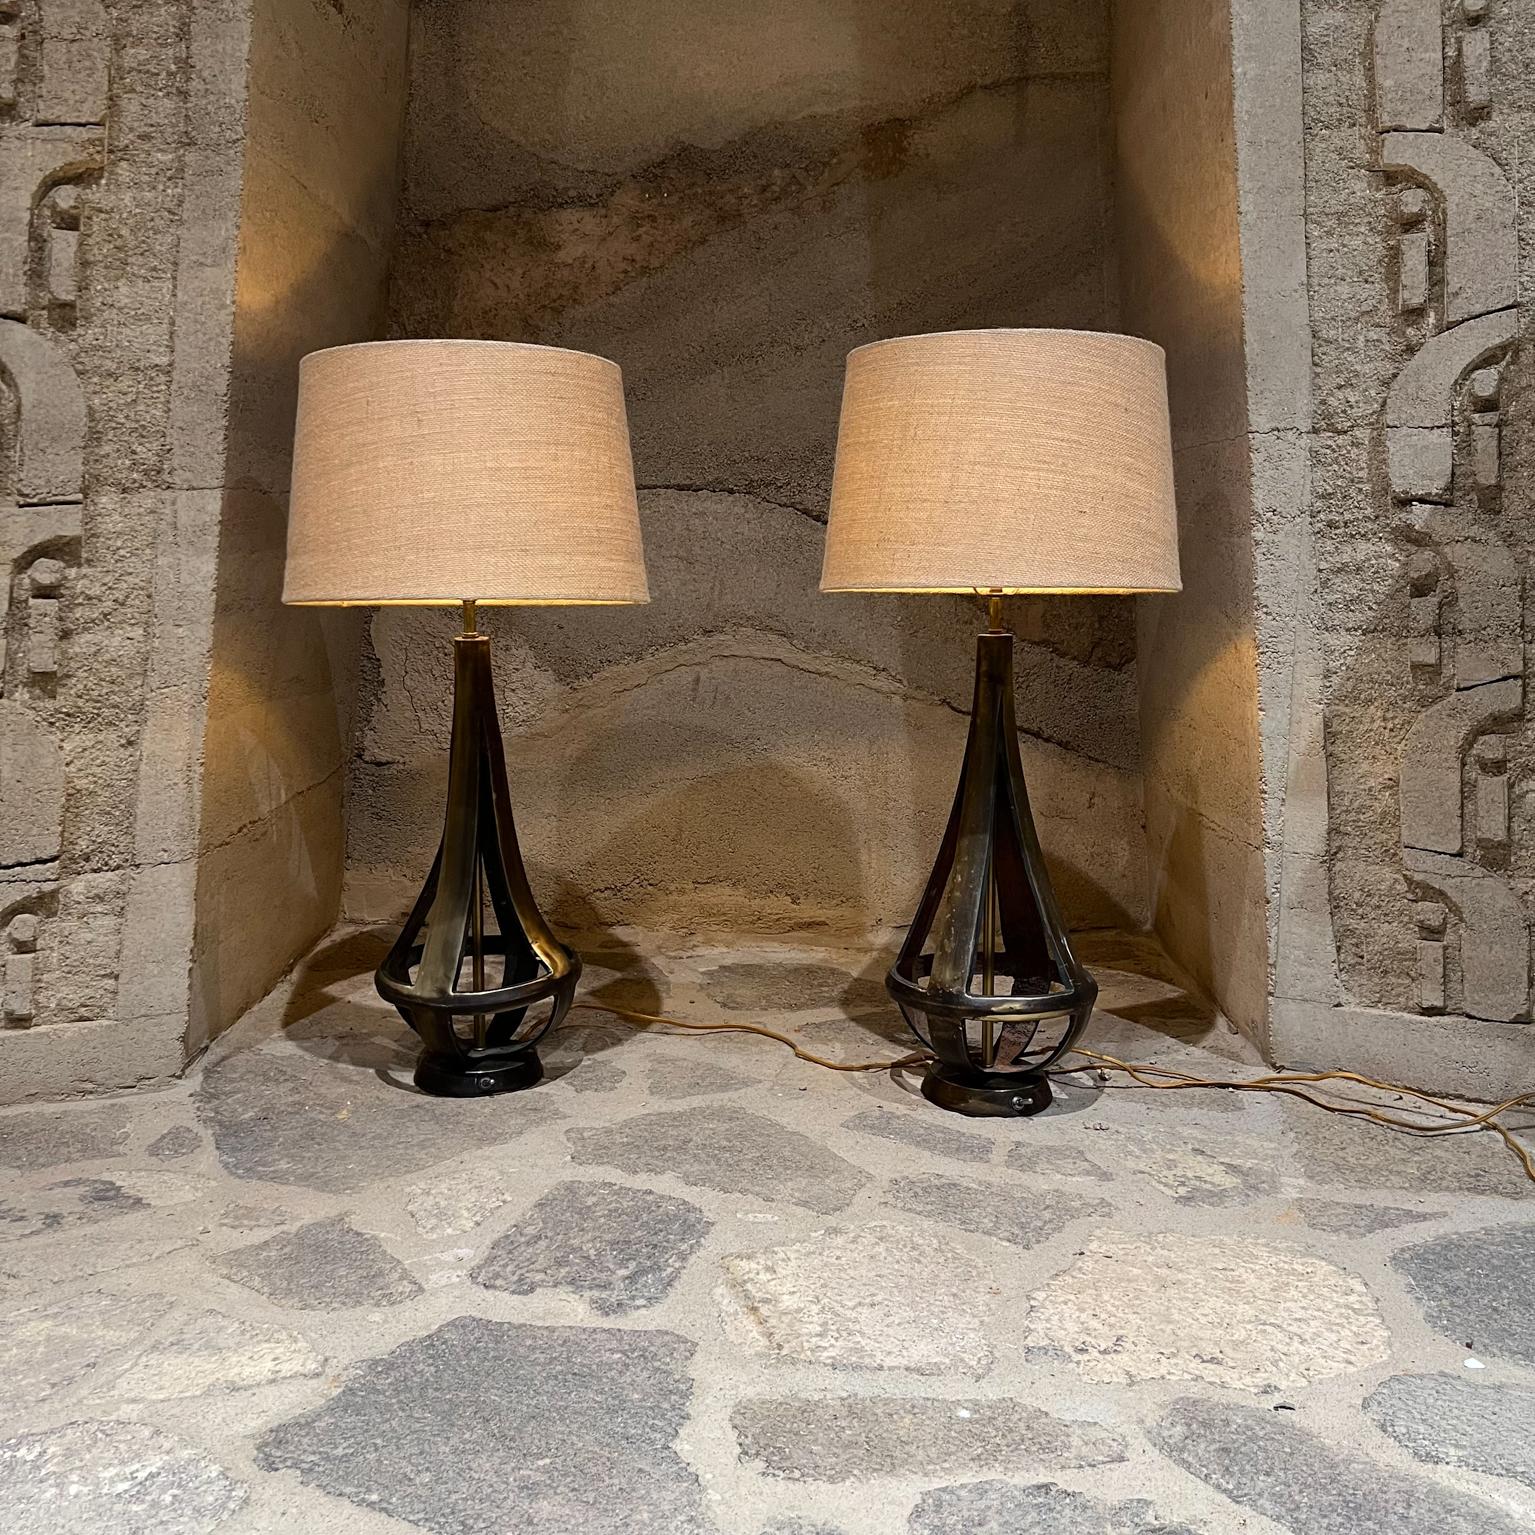 Luxurious Sculptural Two-Toned Brass Bronze Table Lamps Arturo Pani 1950s Mexico For Sale 2